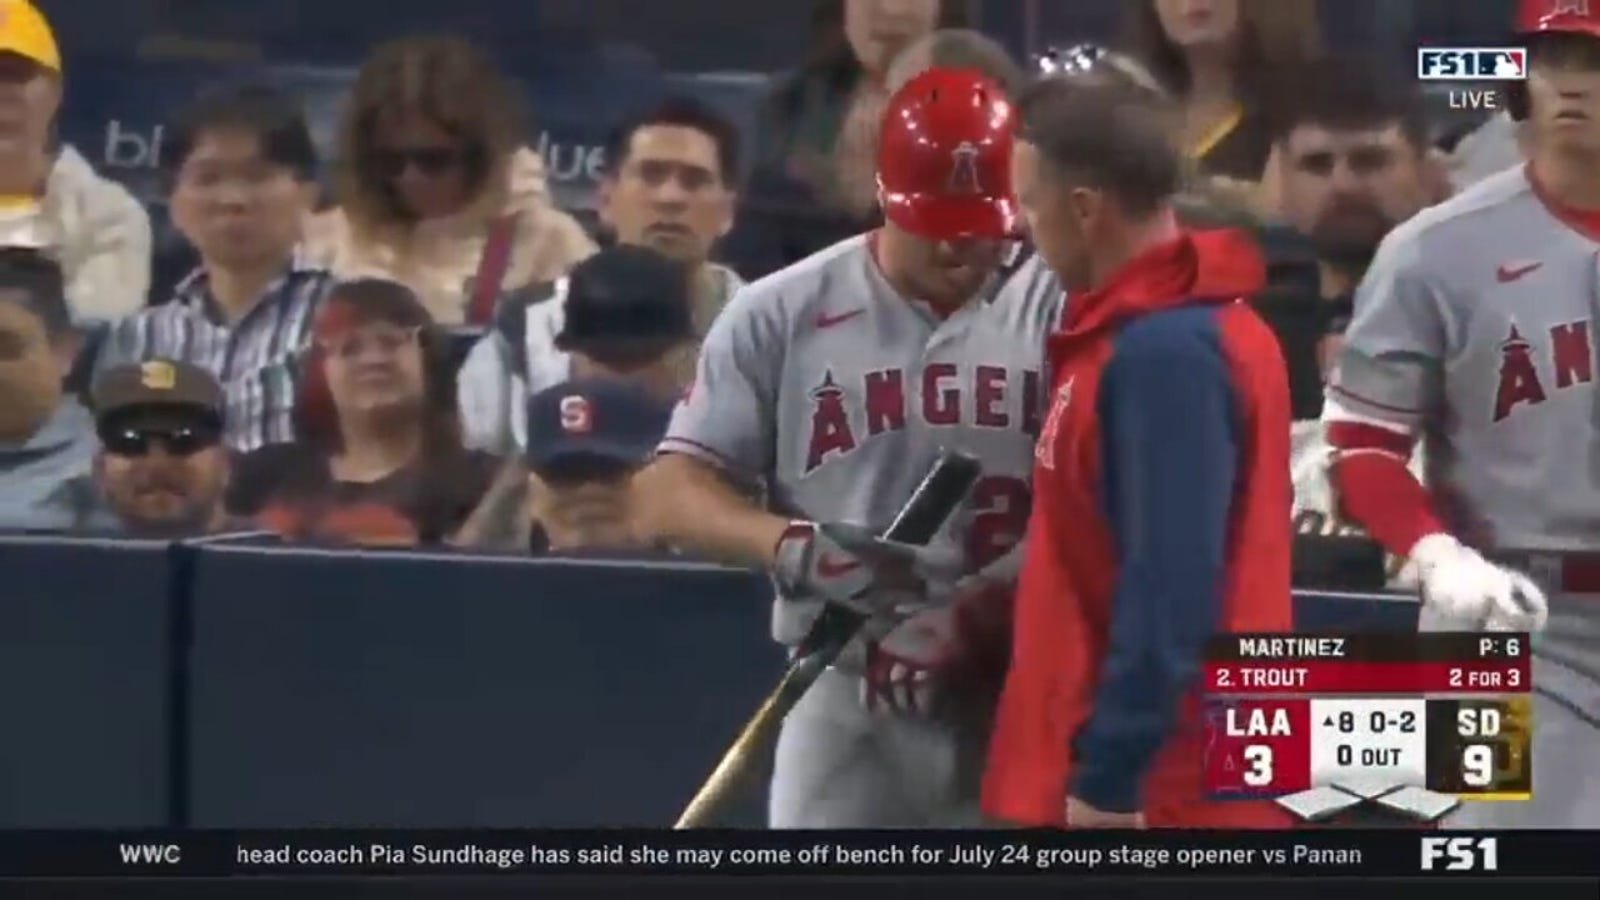 Mike Trout leaves game after suffering injury vs. Padres